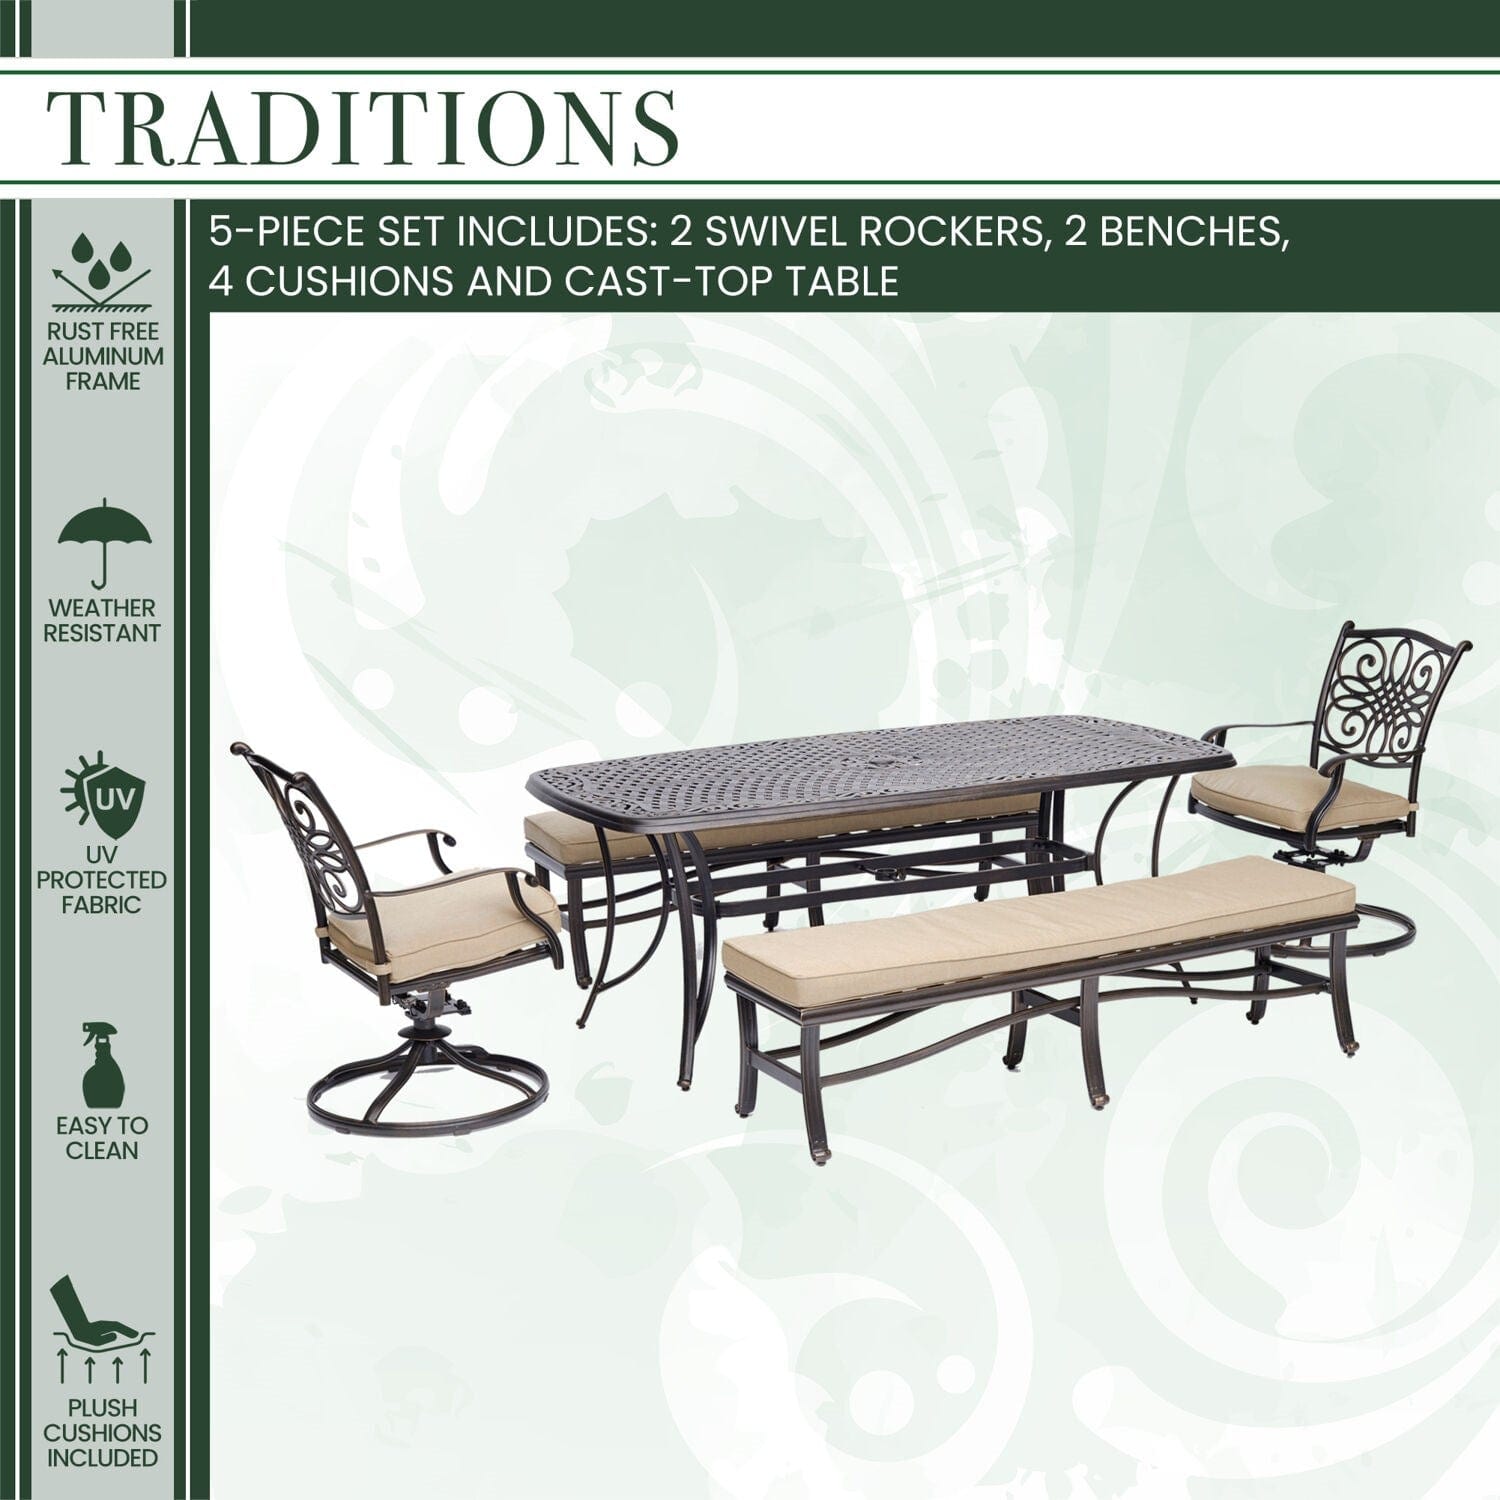 Hanover Outdoor Dining Set Hanover - Traditions 5-Piece Aluminium Frame Patio Dining Set in Tan with 2 Swivel Rockers, 2 Cushioned Benches, and a 38" x 72" Cast-Top Dining Table | TRADDN5PCSW2BN-TAN